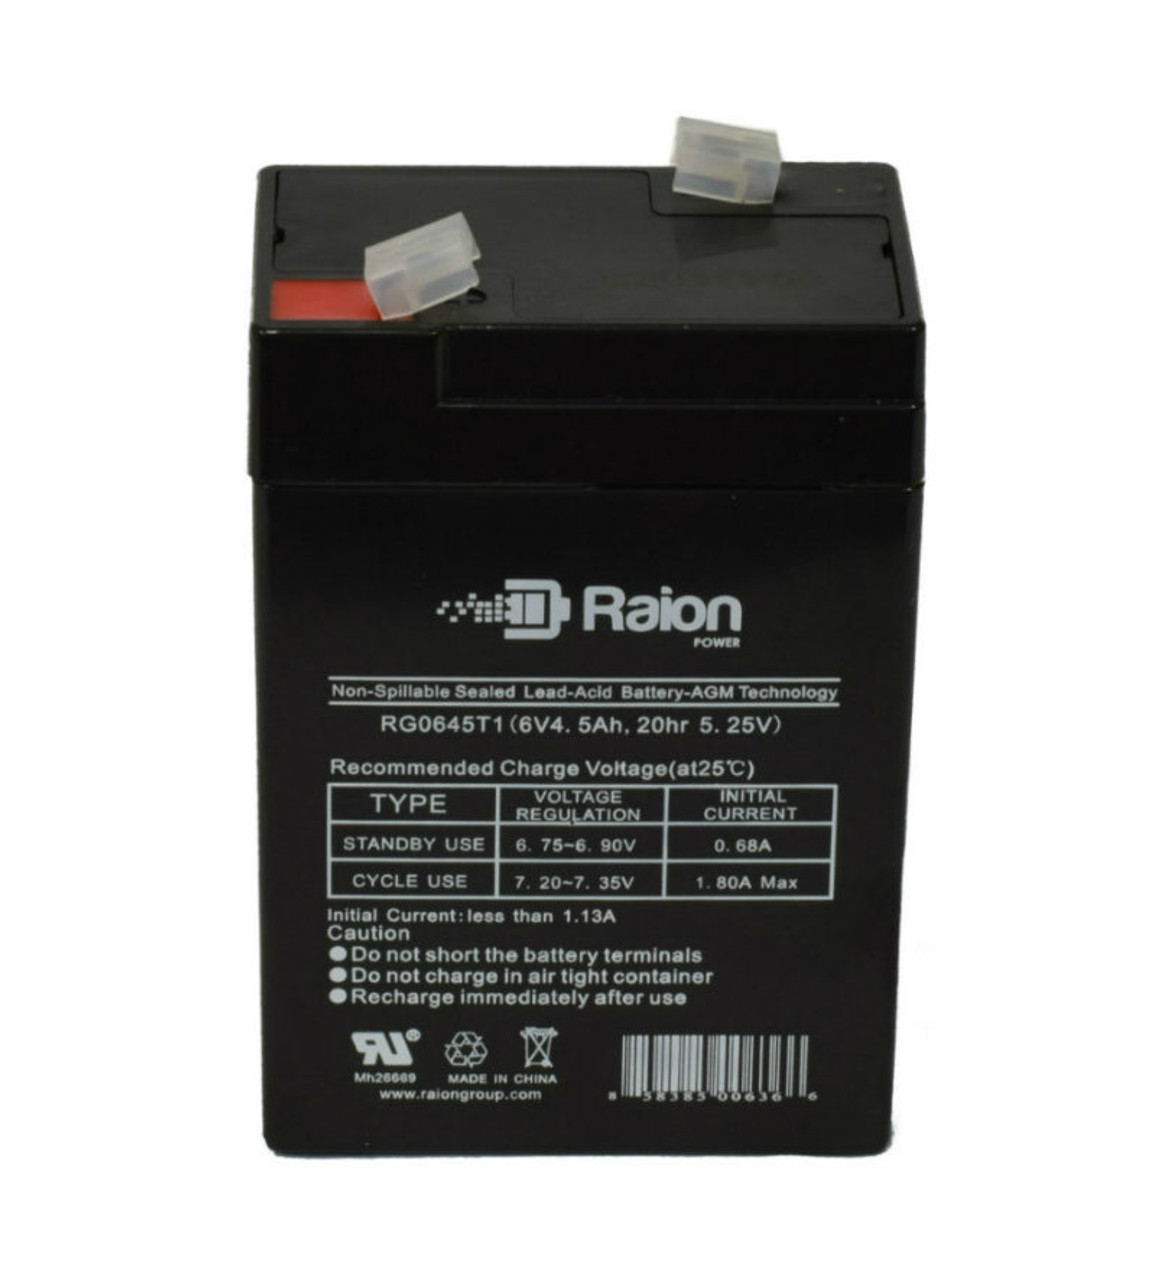 Raion Power RG0645T1 Replacement Battery Cartridge for American Hospital Supply 522 Plus